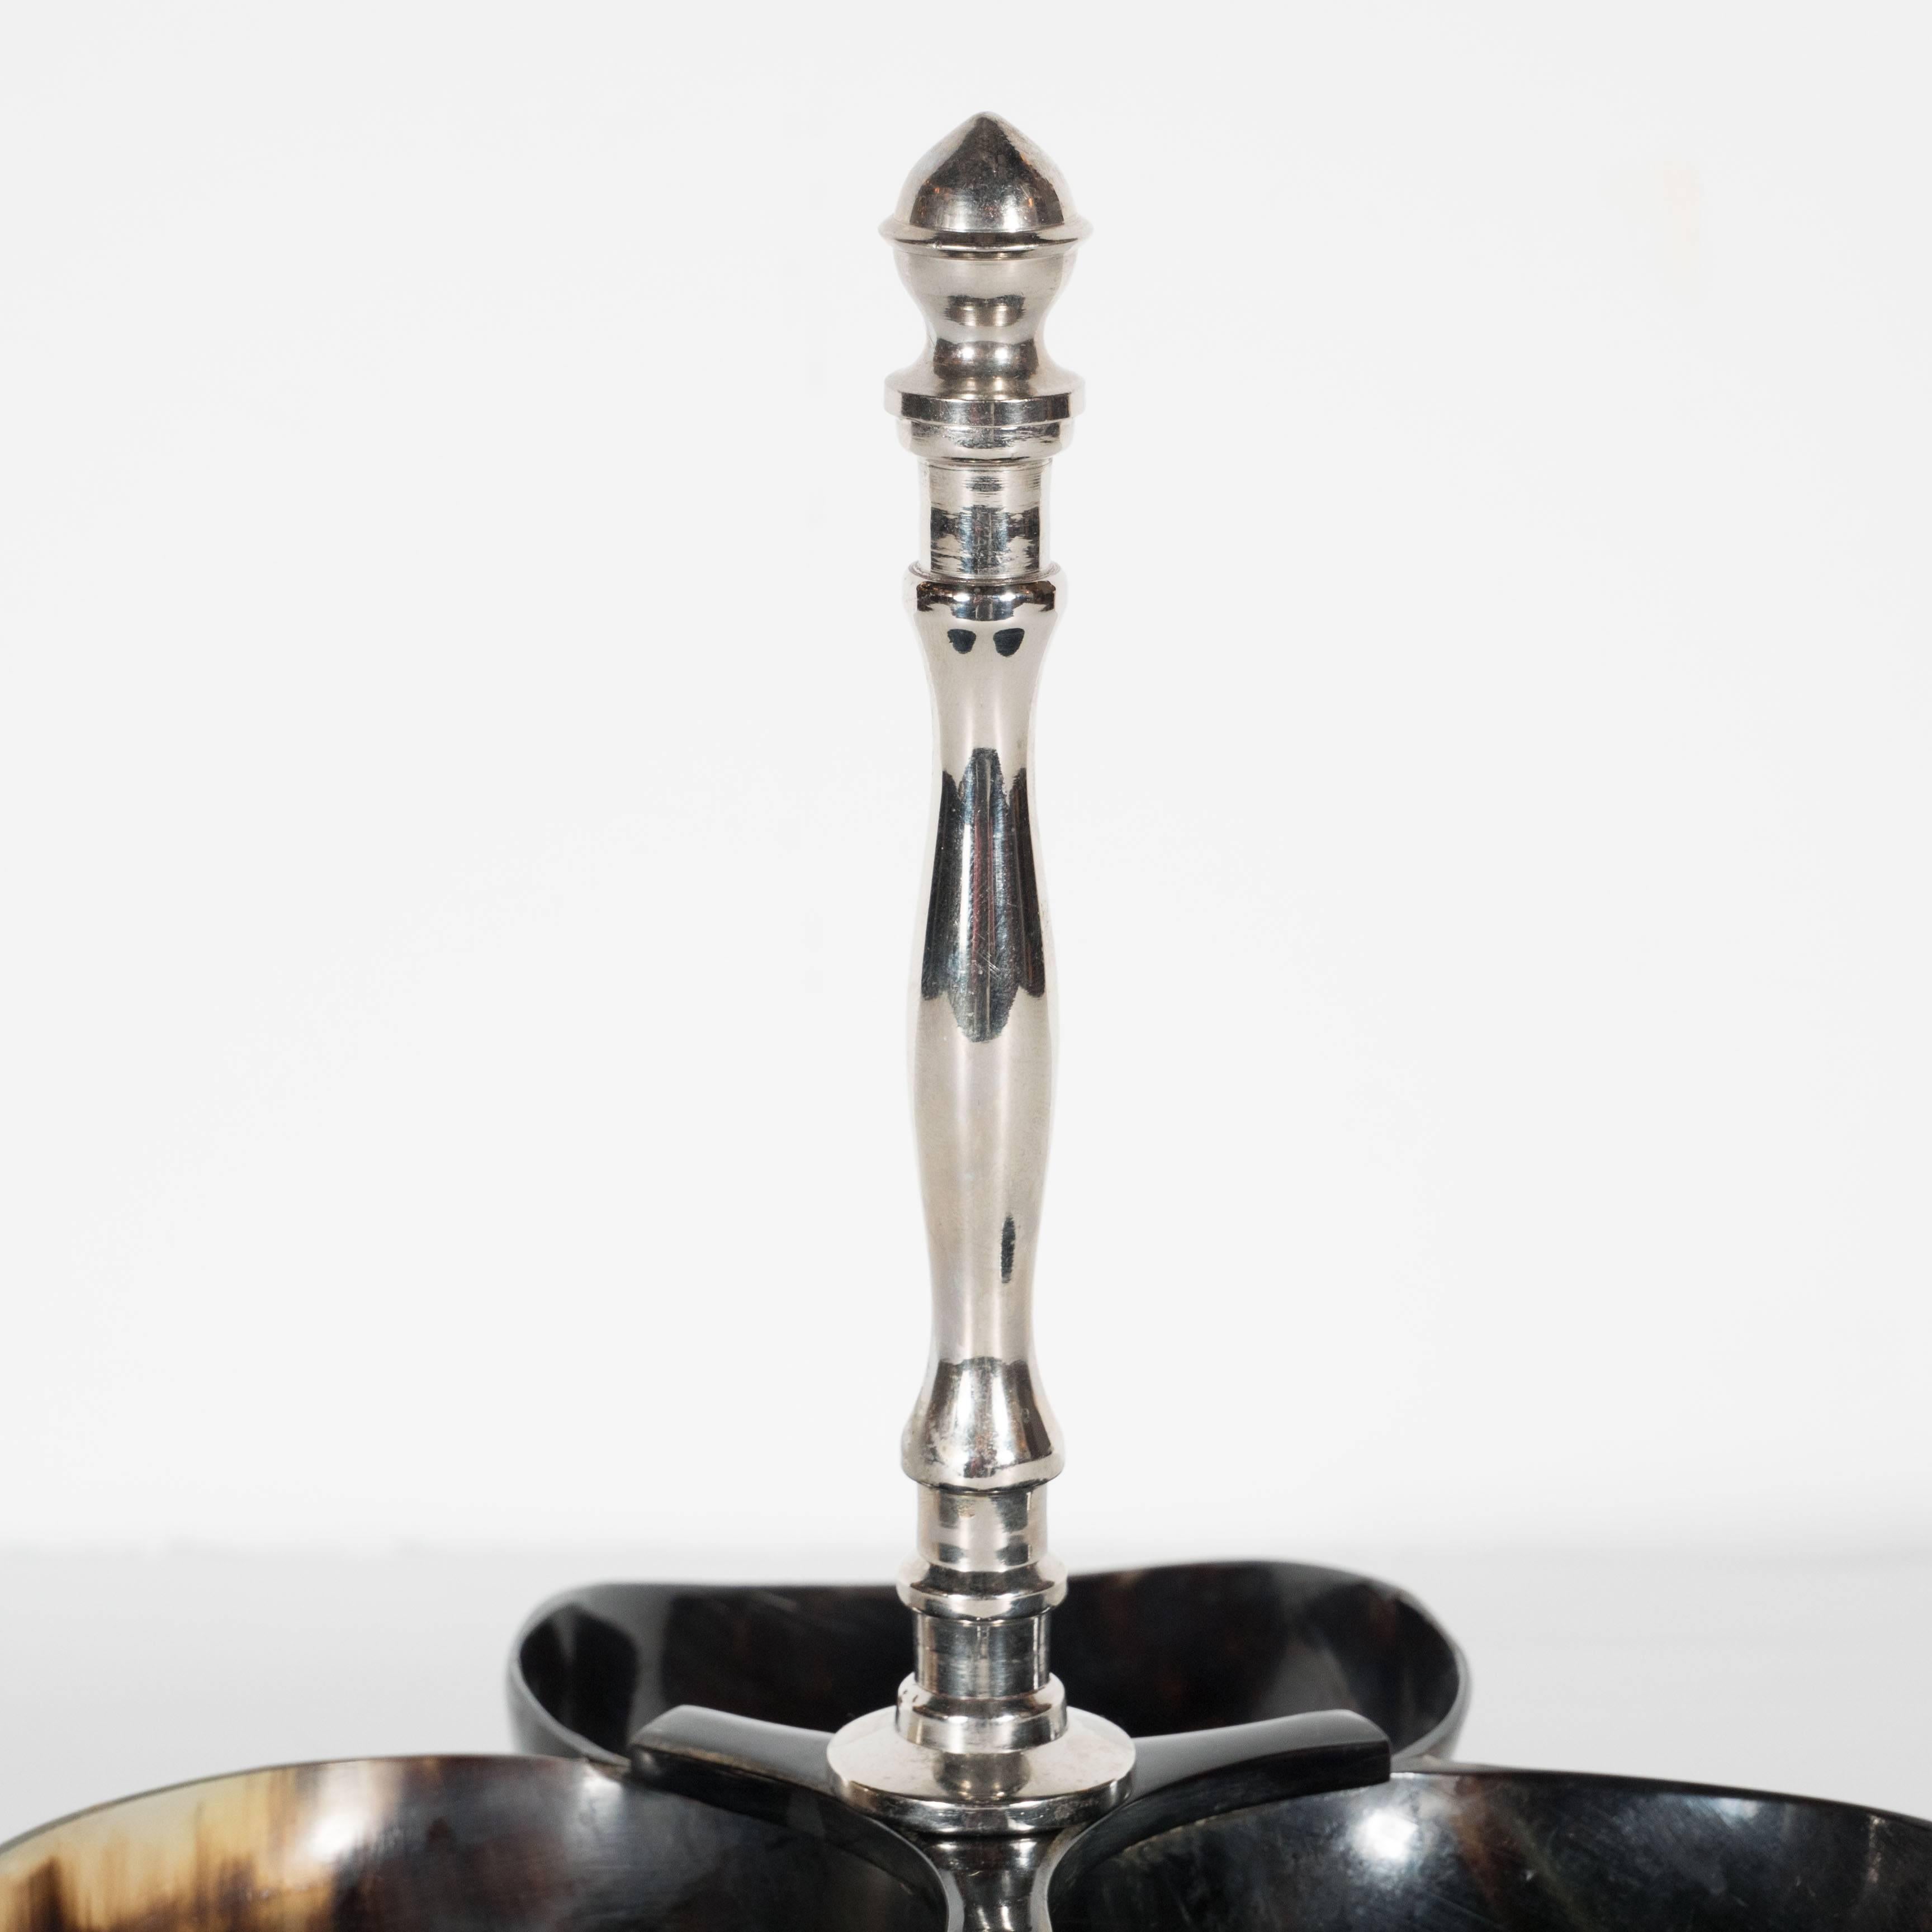 A modernist nut or candy Horn dish or bowl set with detailed chrome handle. From a trio of connected Horn bowls stems a detailed polished chrome handle. A great piece to display a selection of nuts, dry fruit or candy. This piece is in excellent